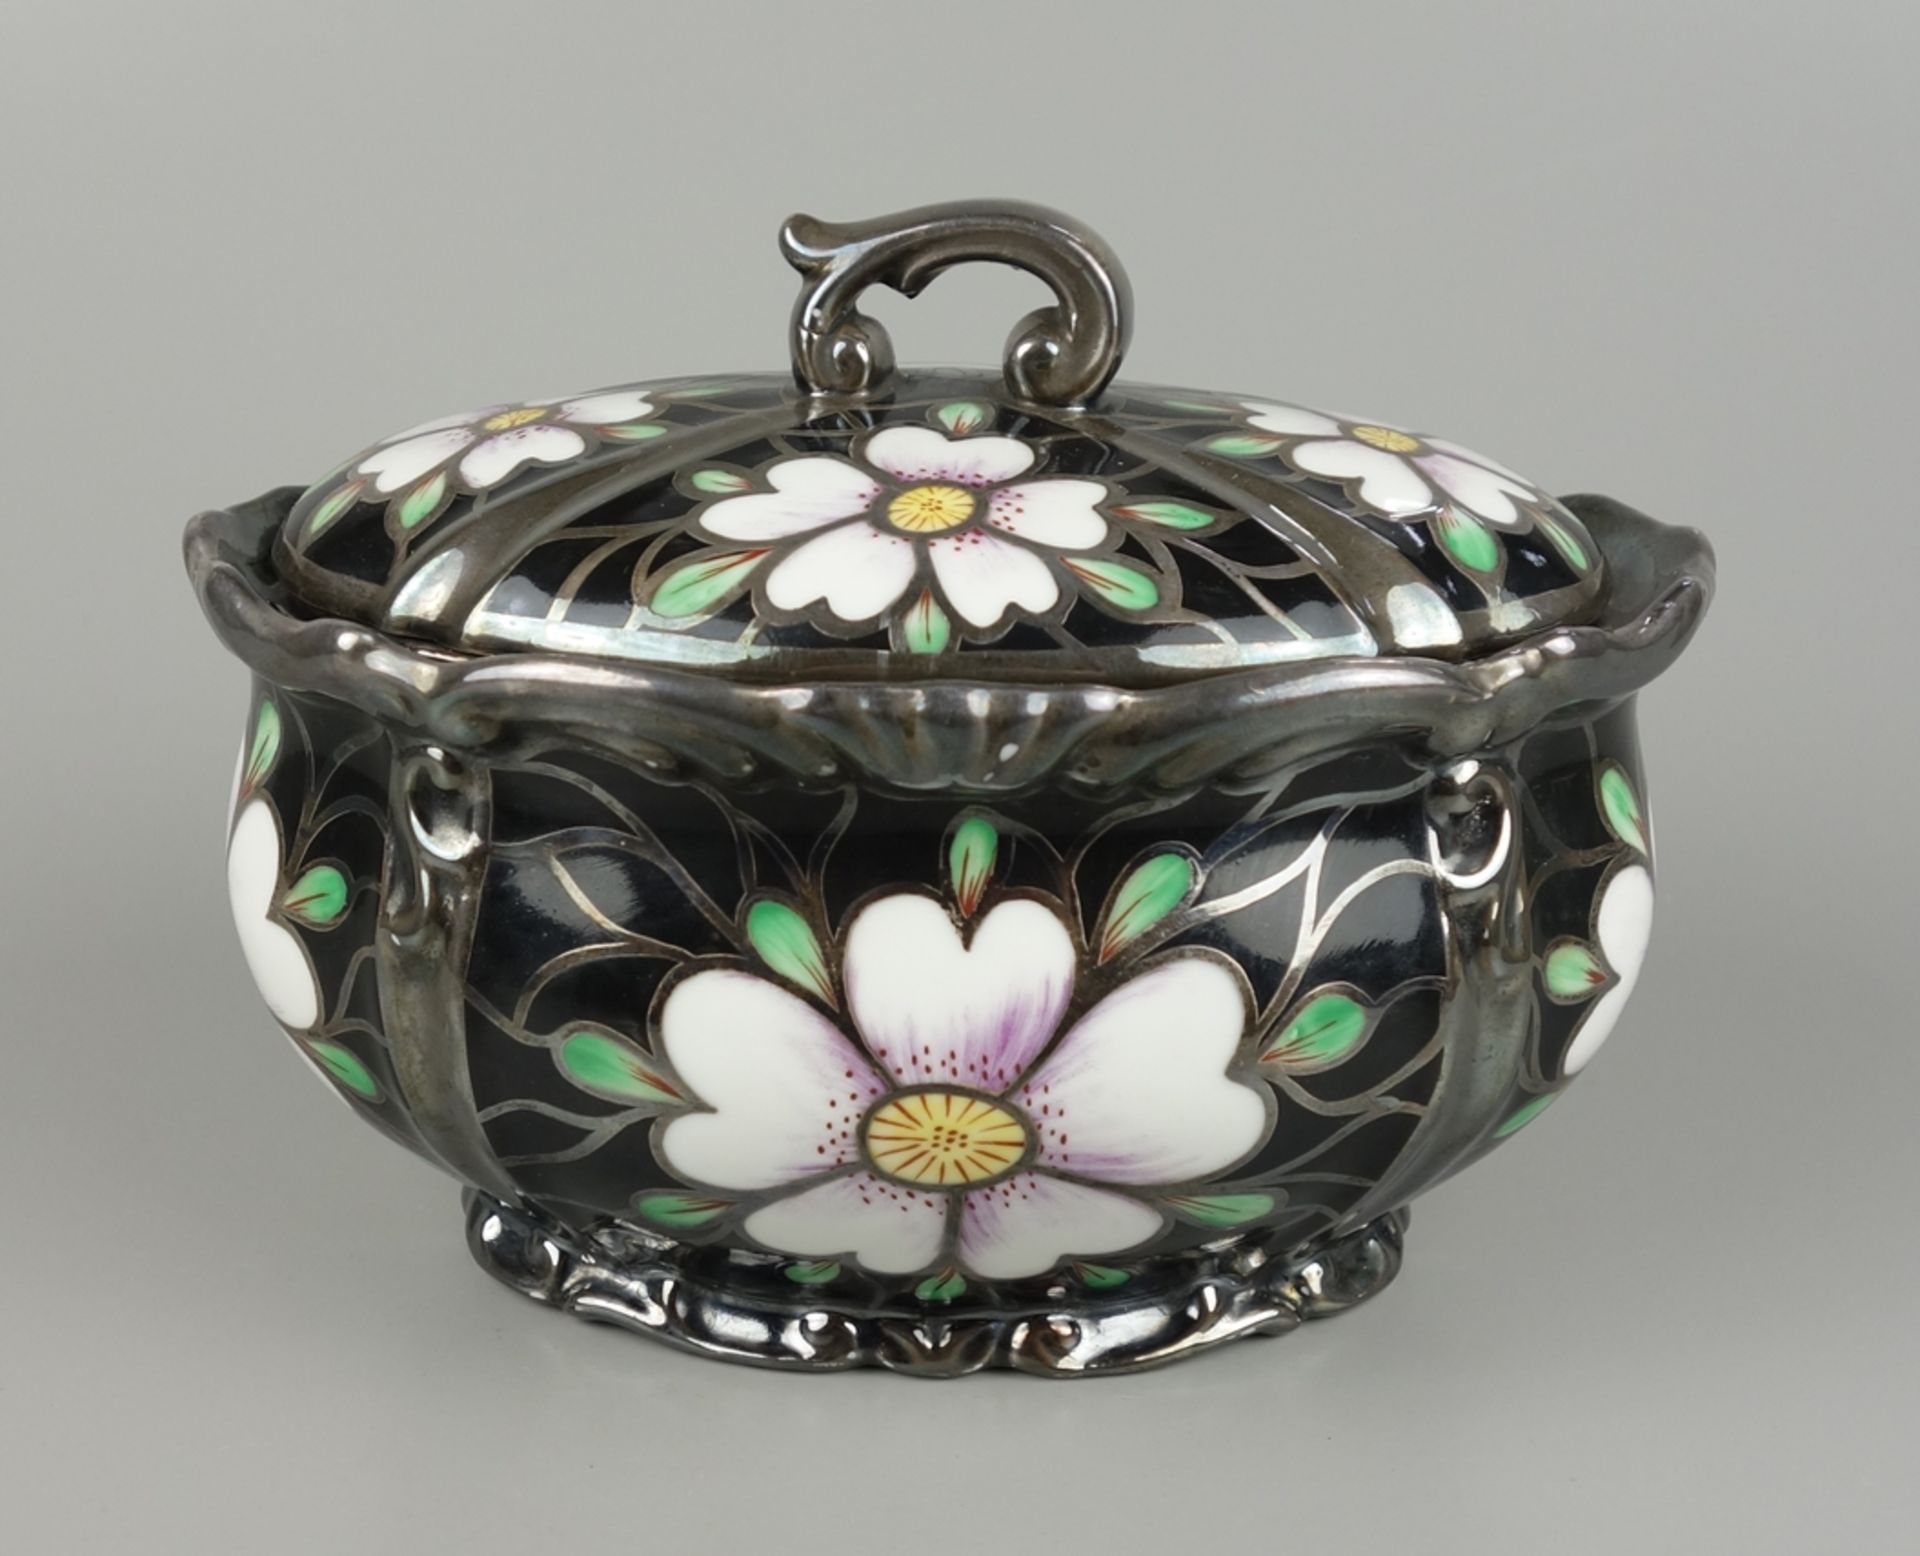 Porcelain box with silver overlay, Württemberg porcelain, 1920/1930s